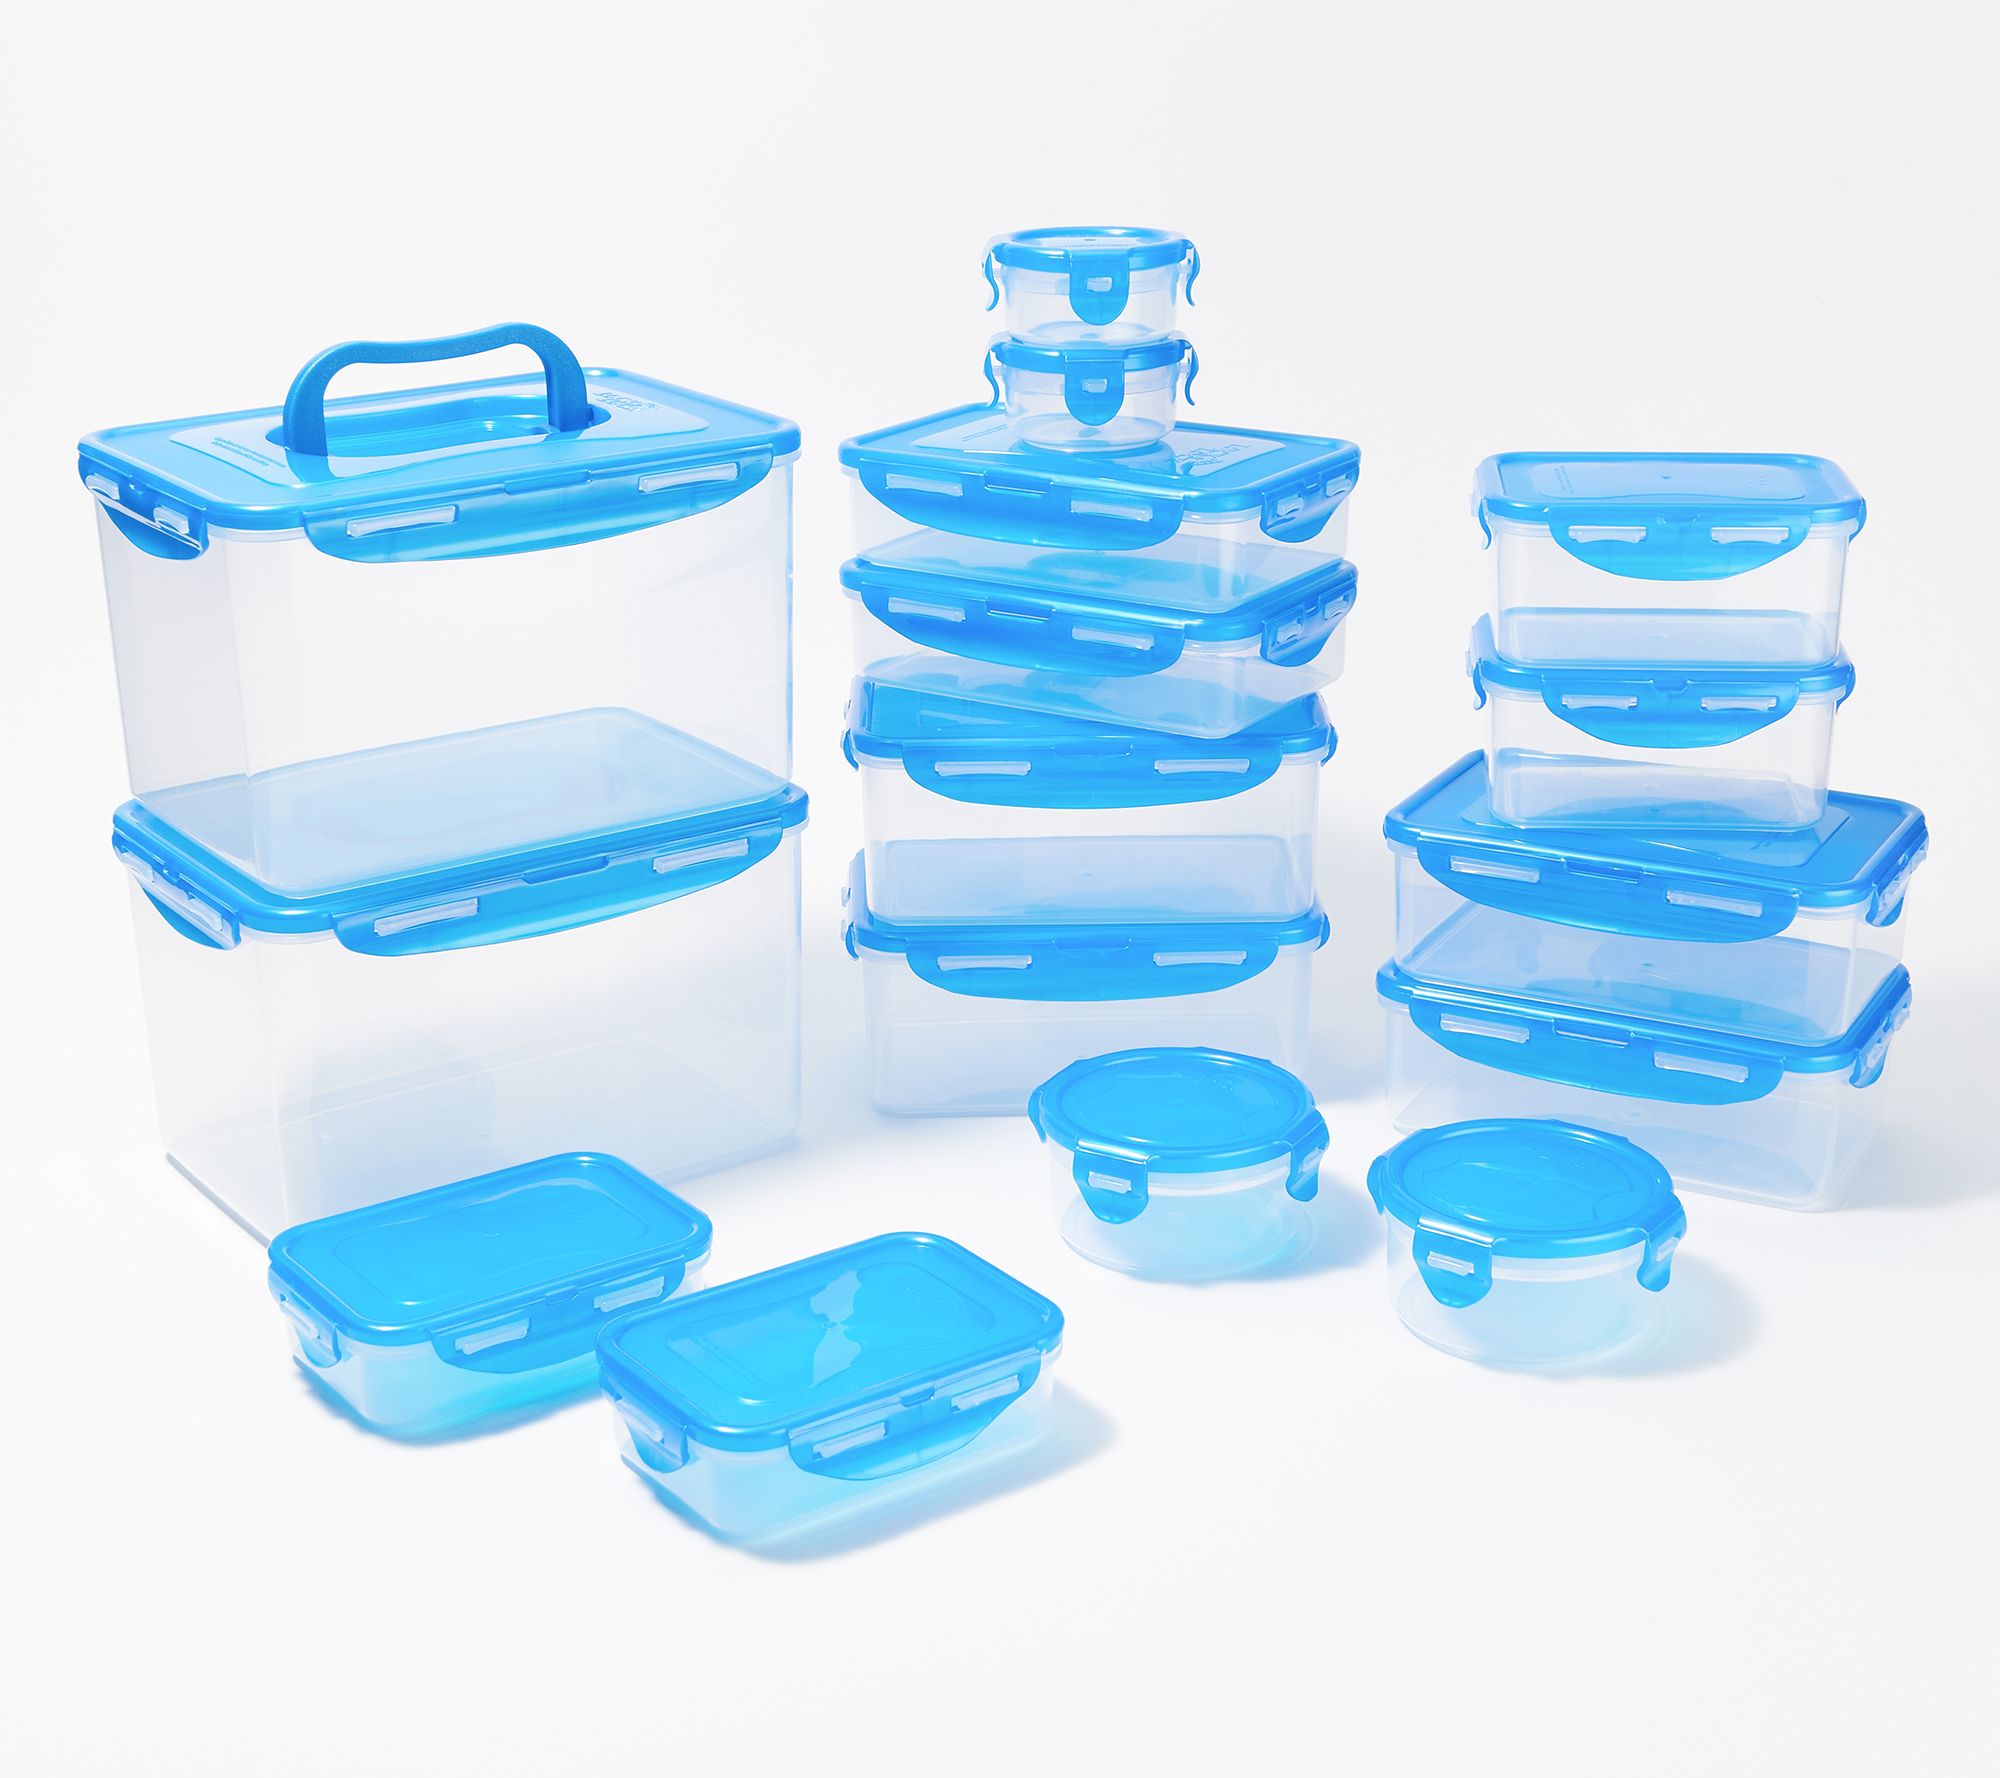 LocknLock XL Multi-Function Storage Container with Handles - QVC